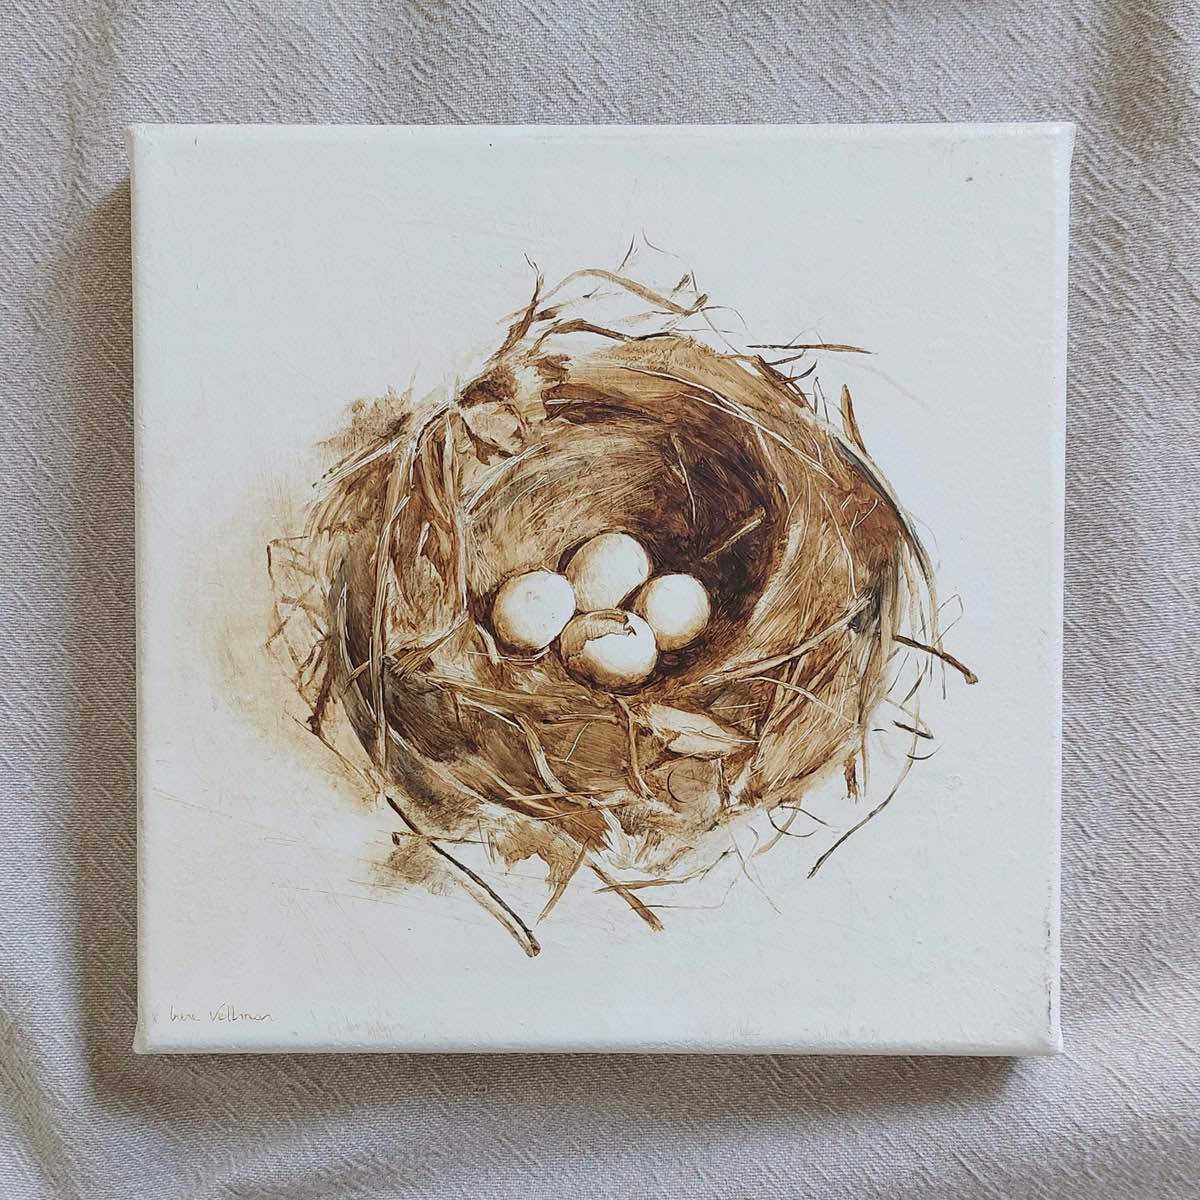 Original oil painting of a bird's nest with four eggs.